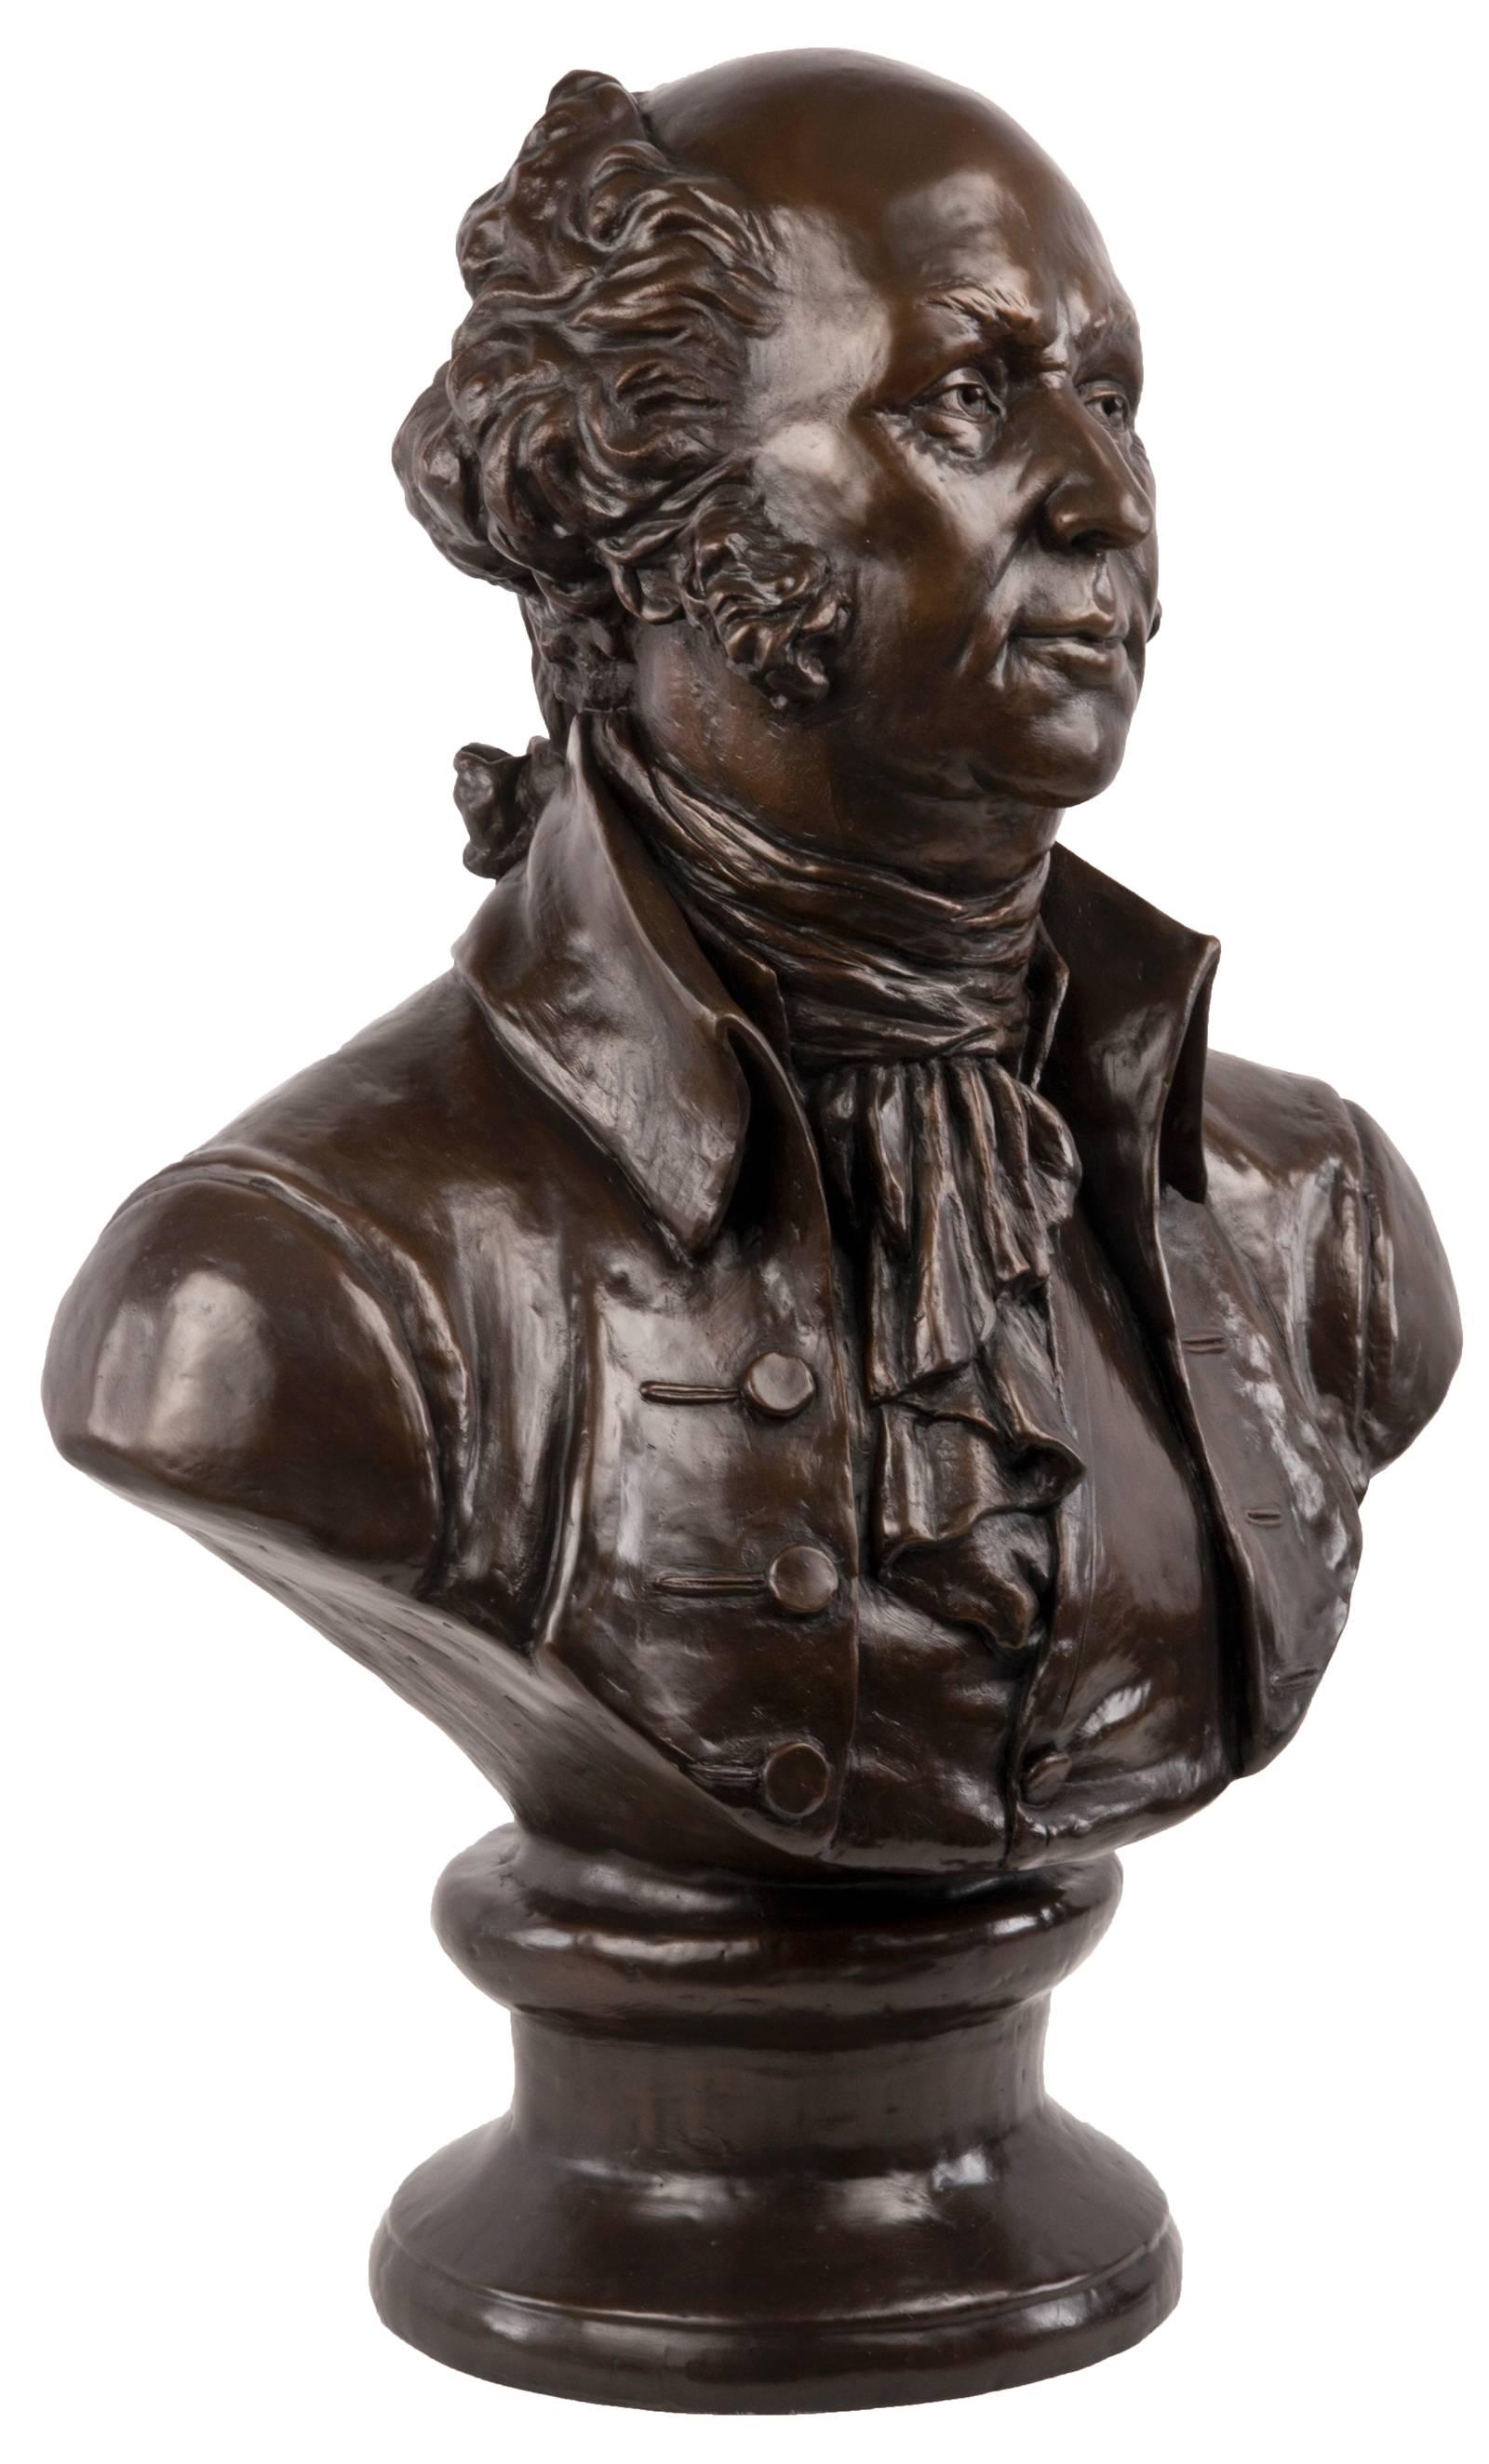 A contemporary sculptural bust of John Adams (1735 - 1826), who was an important political figure in building the foundation of America. Sturgis has represented Adams as a dignified gentleman, an expression of engagement on his face, dressed in a